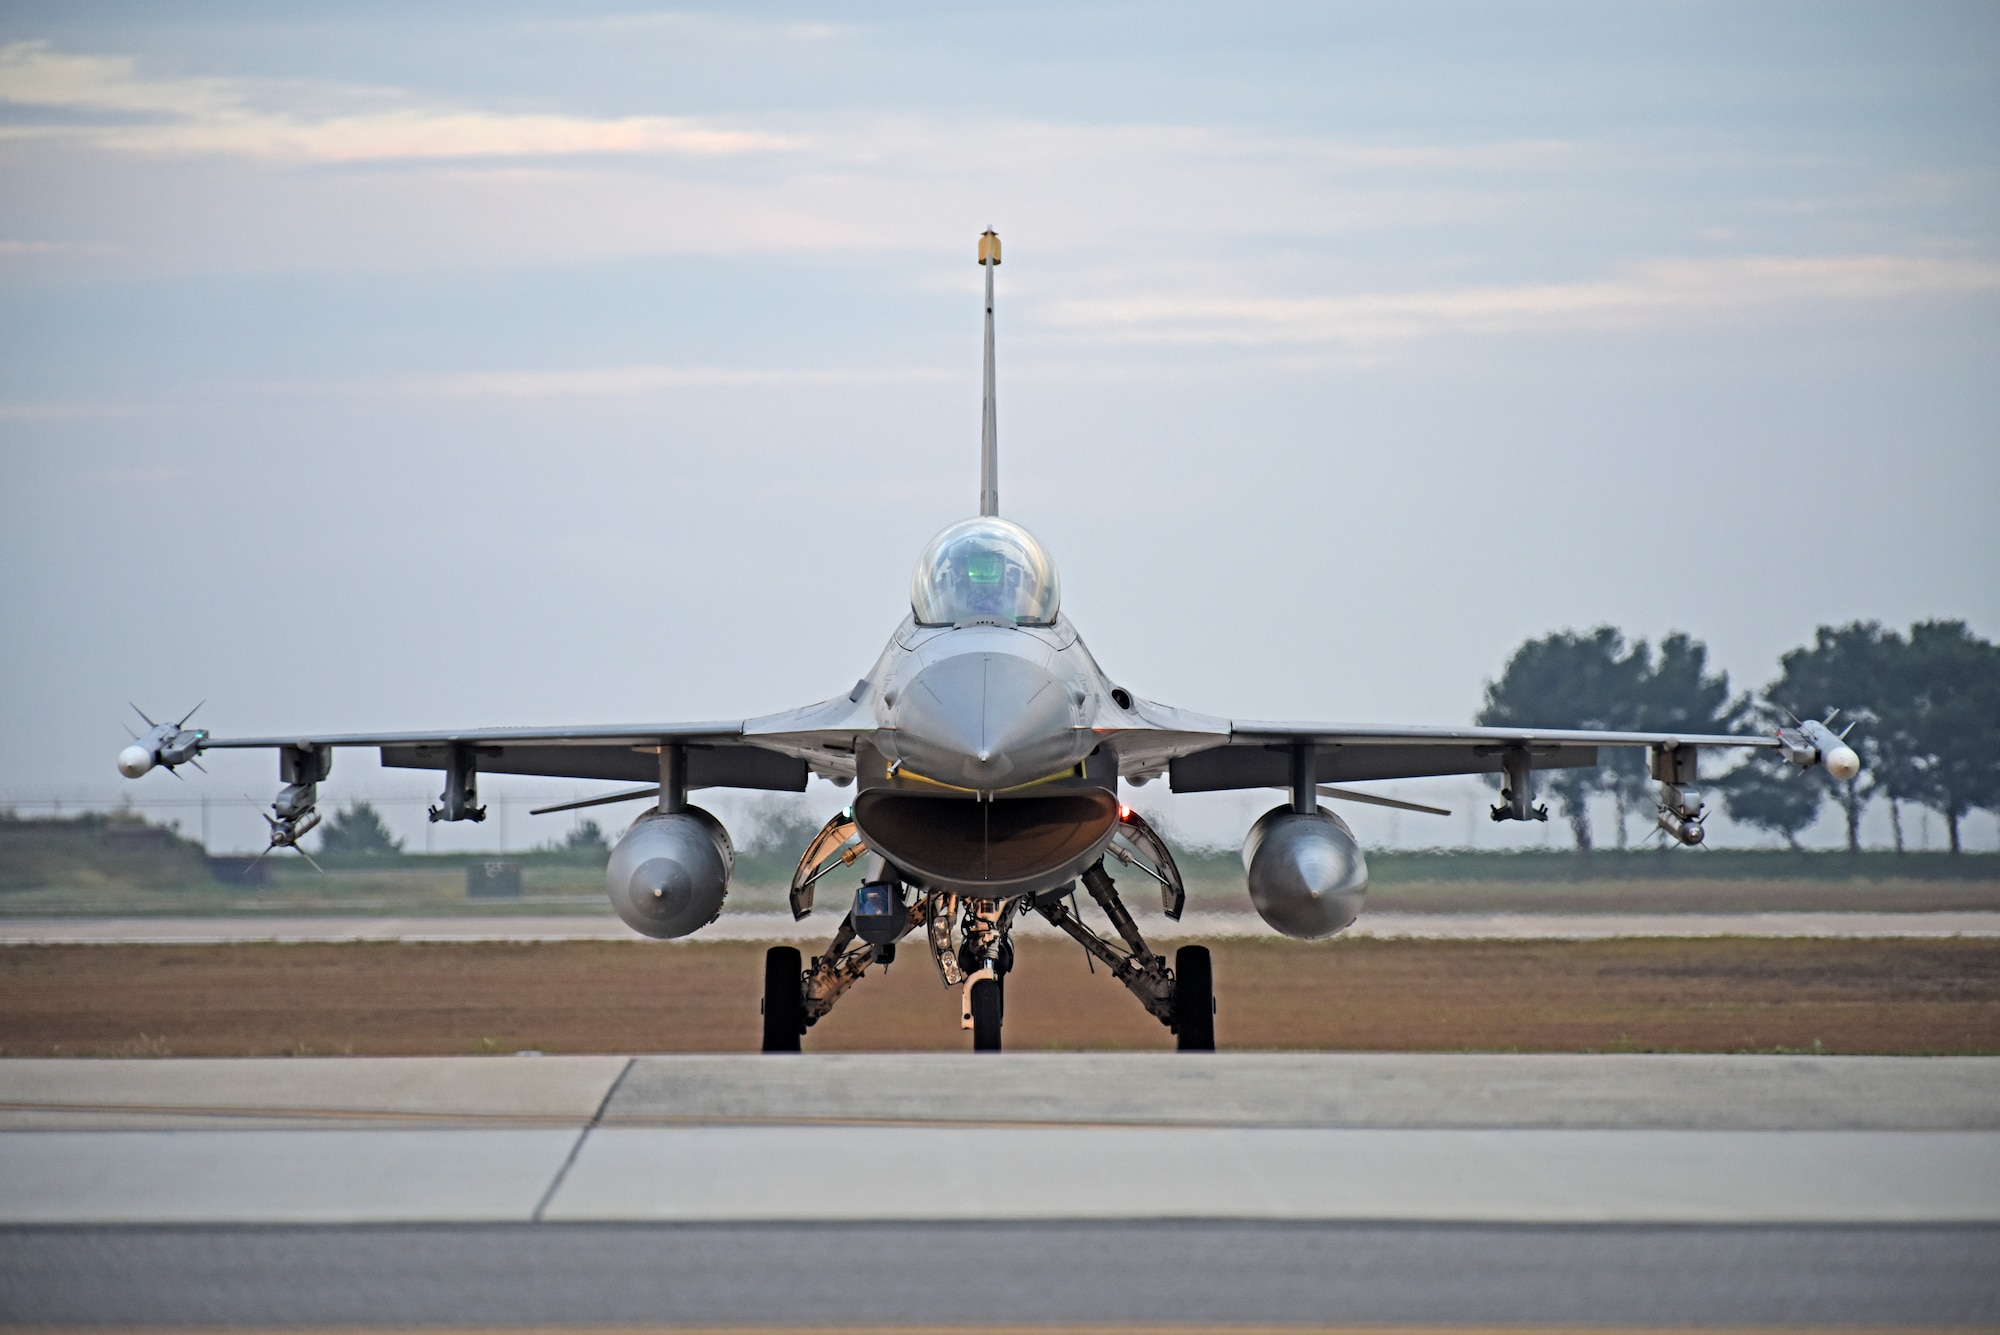 A U.S. Air Force F-16 Fighting Falcon assigned to the 80th Fighter Squadron “Juvats” prepares for a routine training flight at Kunsan Air Base, Republic of Korea, Oct. 10, 2019. The 80th FS is one of two fighter squadrons assigned to the 8th Fighter Wing. The squadron was activated during World War II in 1942, as the 80th Pursuit Squadron. (U.S. Air Force photo by Staff Sgt. Mackenzie Mendez)